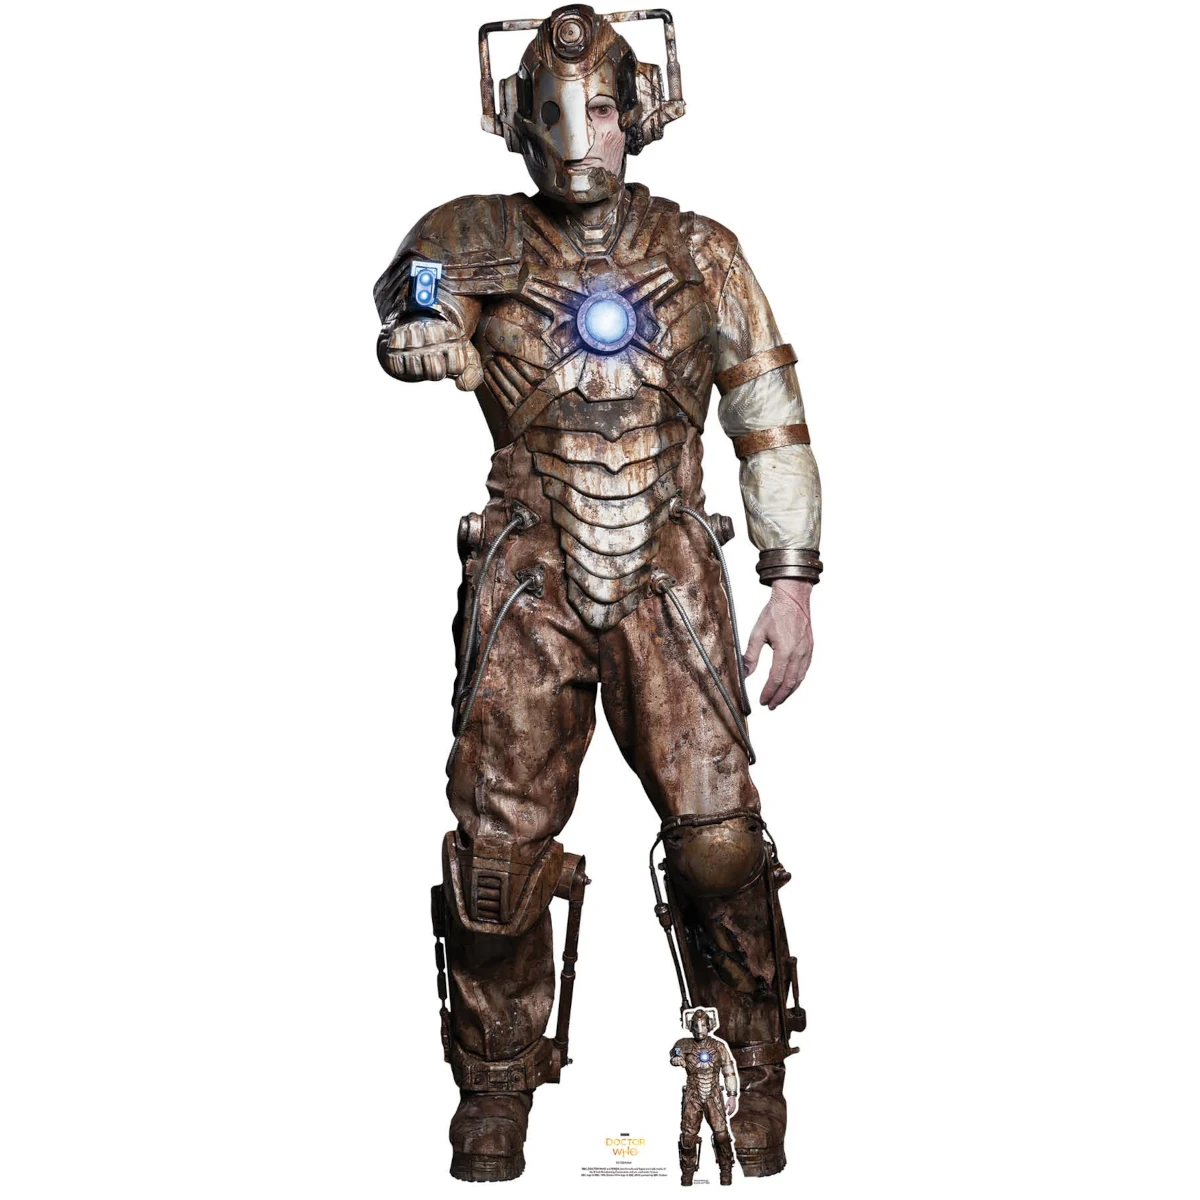 SC1522 Ashad The Lone Cyberman (Doctor Who) Lifesize + Mini Cardboard Cutout Standee Front